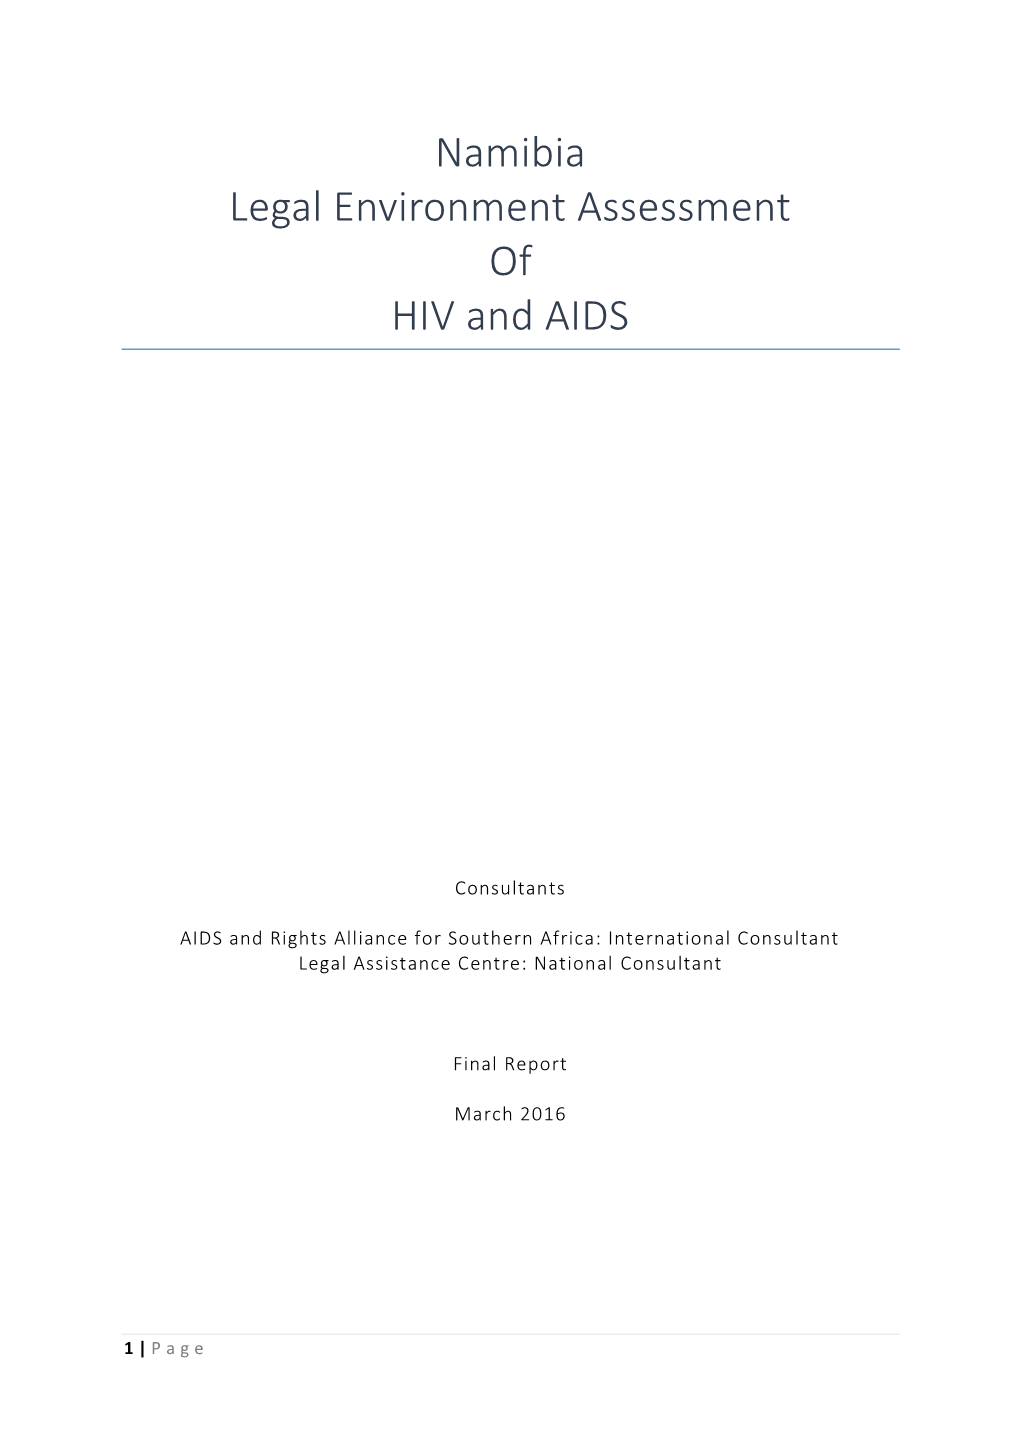 Namibia Legal Environment Assessment of HIV and AIDS